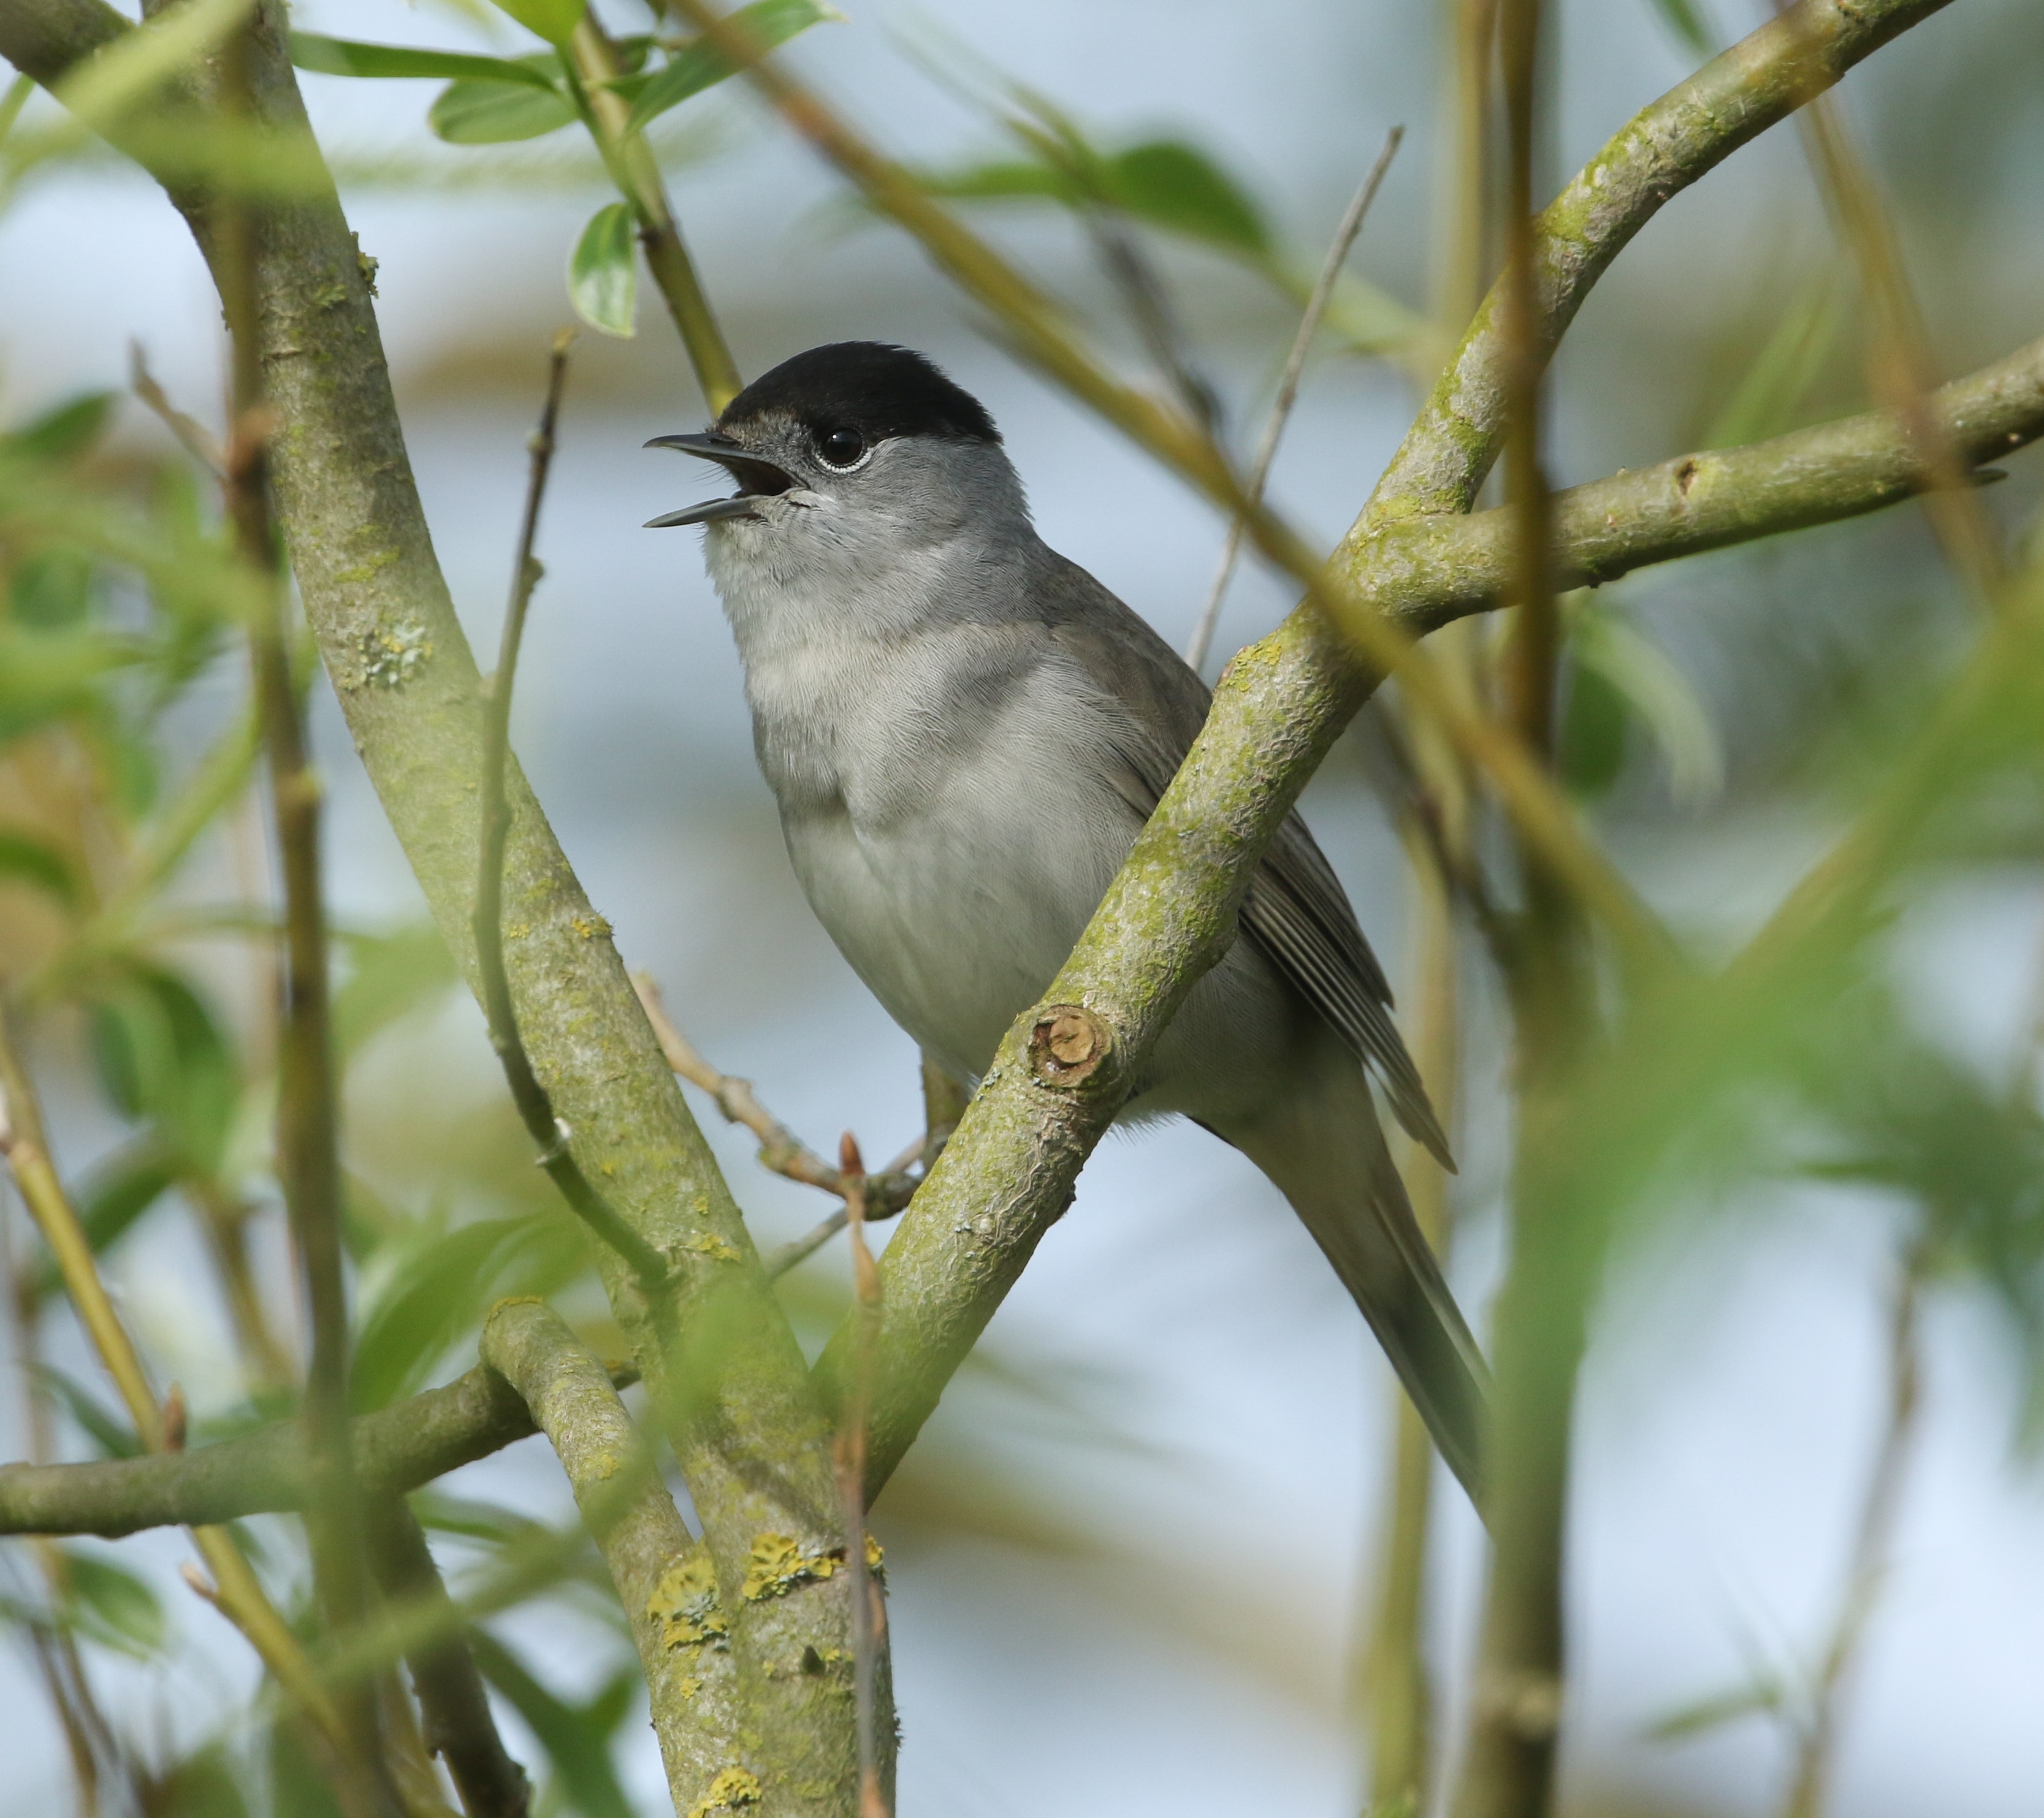 Close up of a Blackcap perched on a tree branch